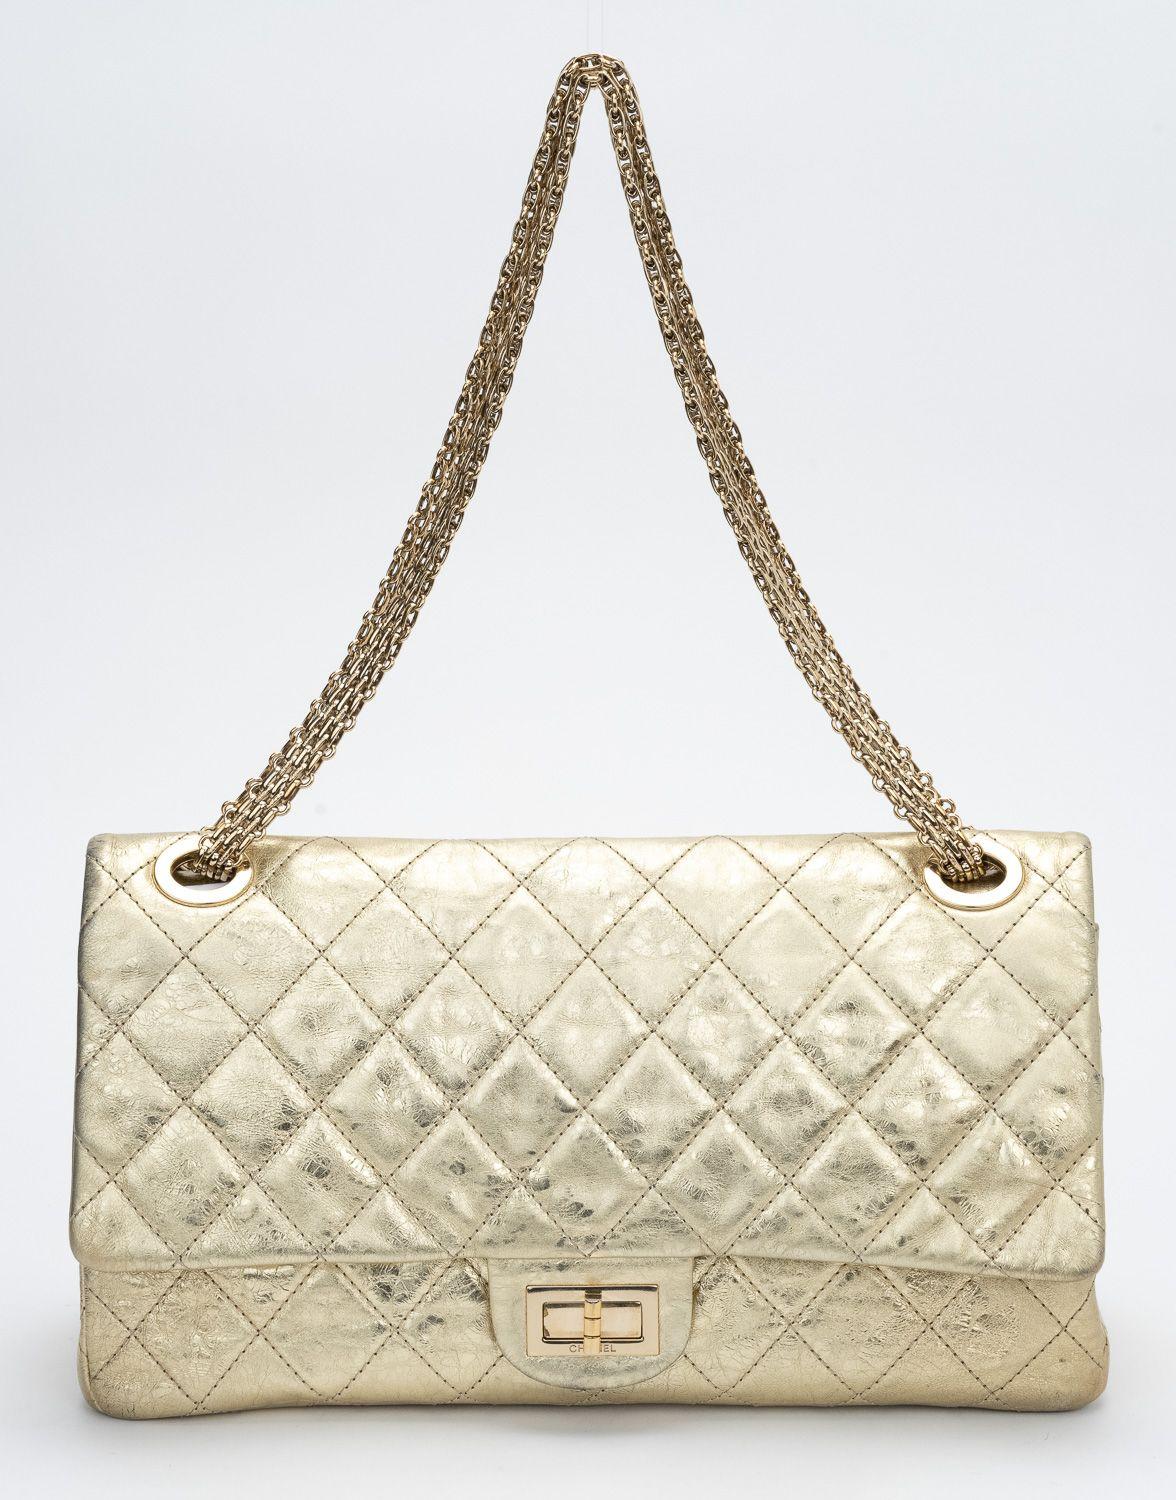 Chanel limited edition maxi reissue double flap with extra thick silver chain. Gold metallic distressed leather. Shoulder drop 10